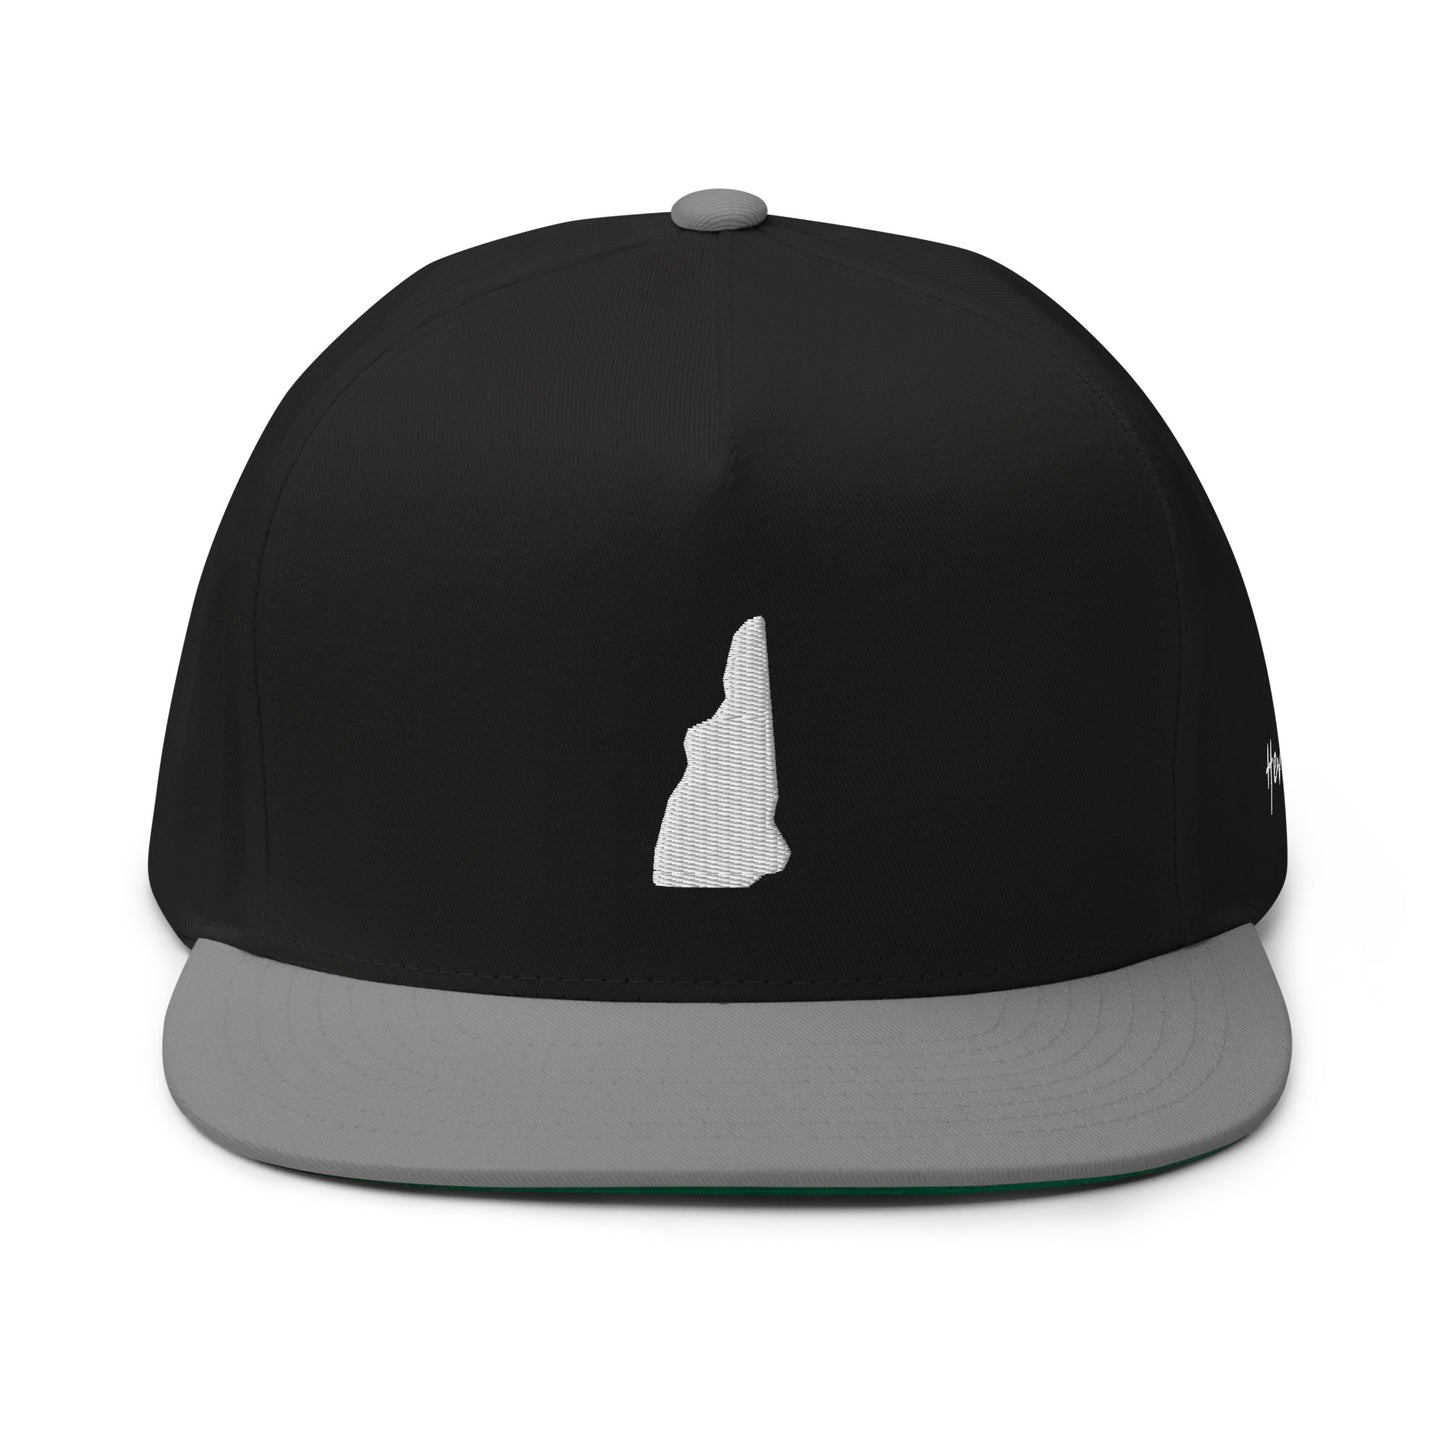 New Hampshire State Silhouette 5 Panel A-Frame Snapback Hat